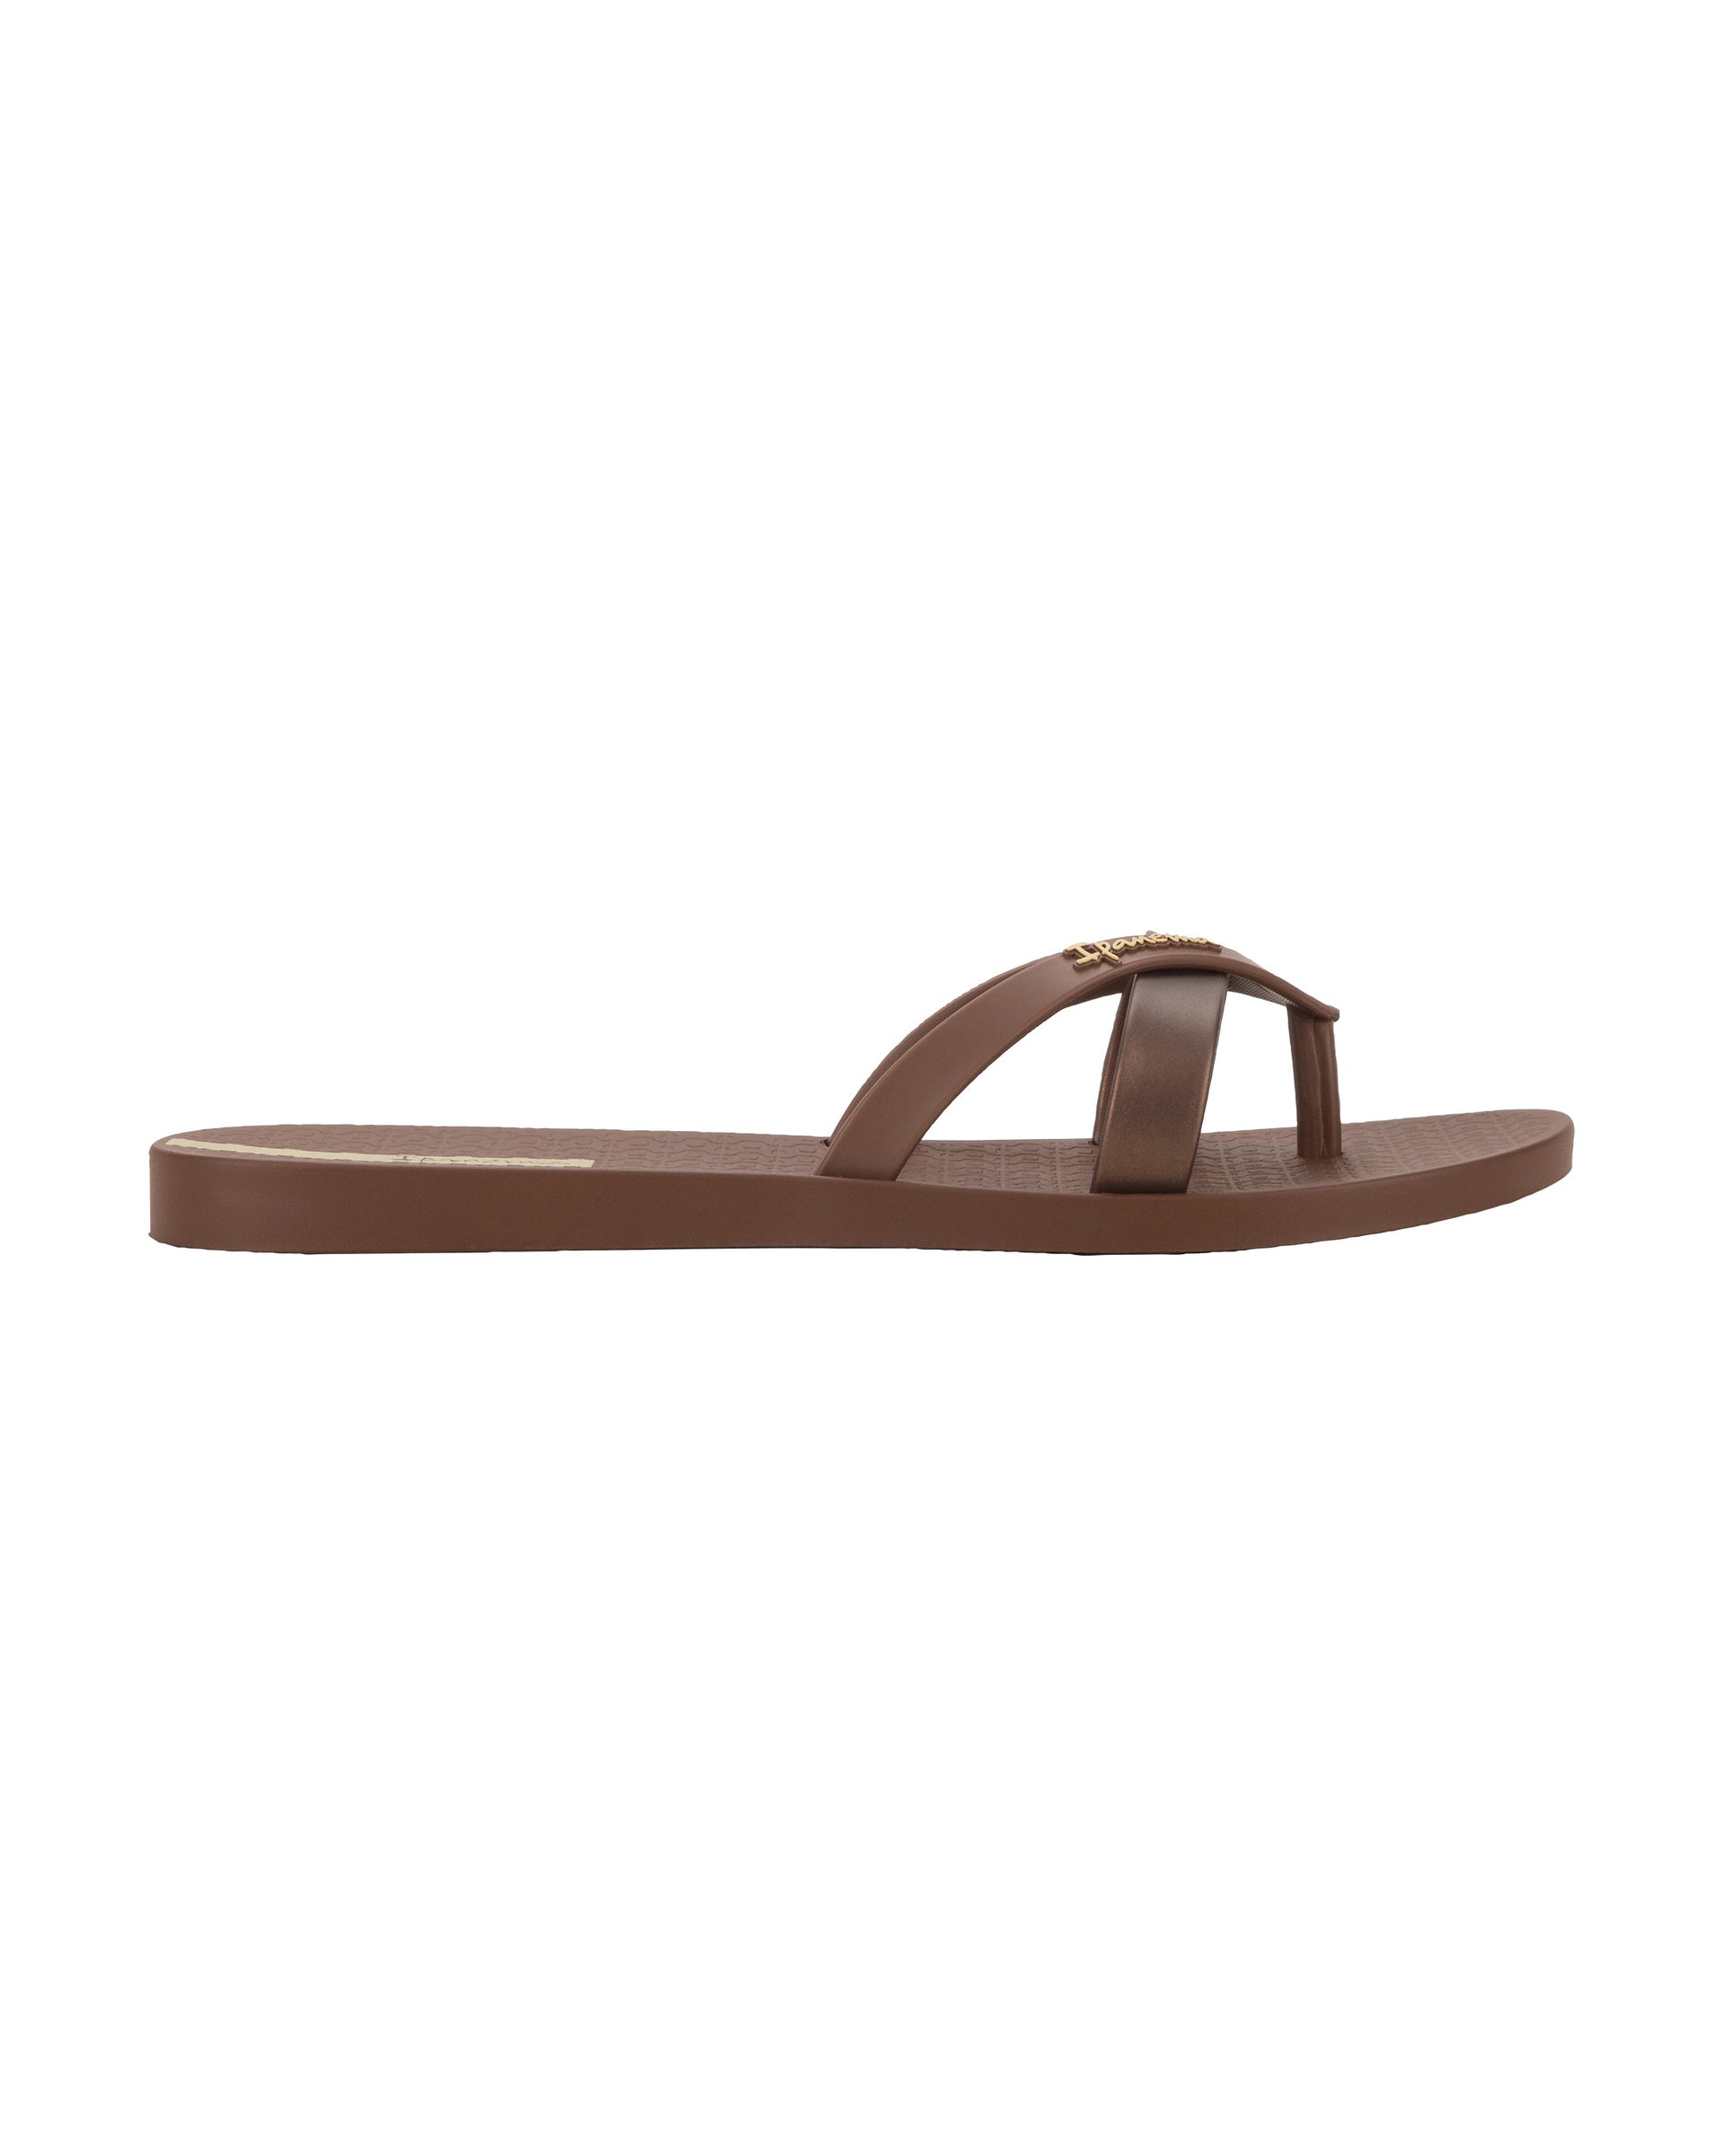 Outer side view of a brown Ipanema Kirei women's flip flop.